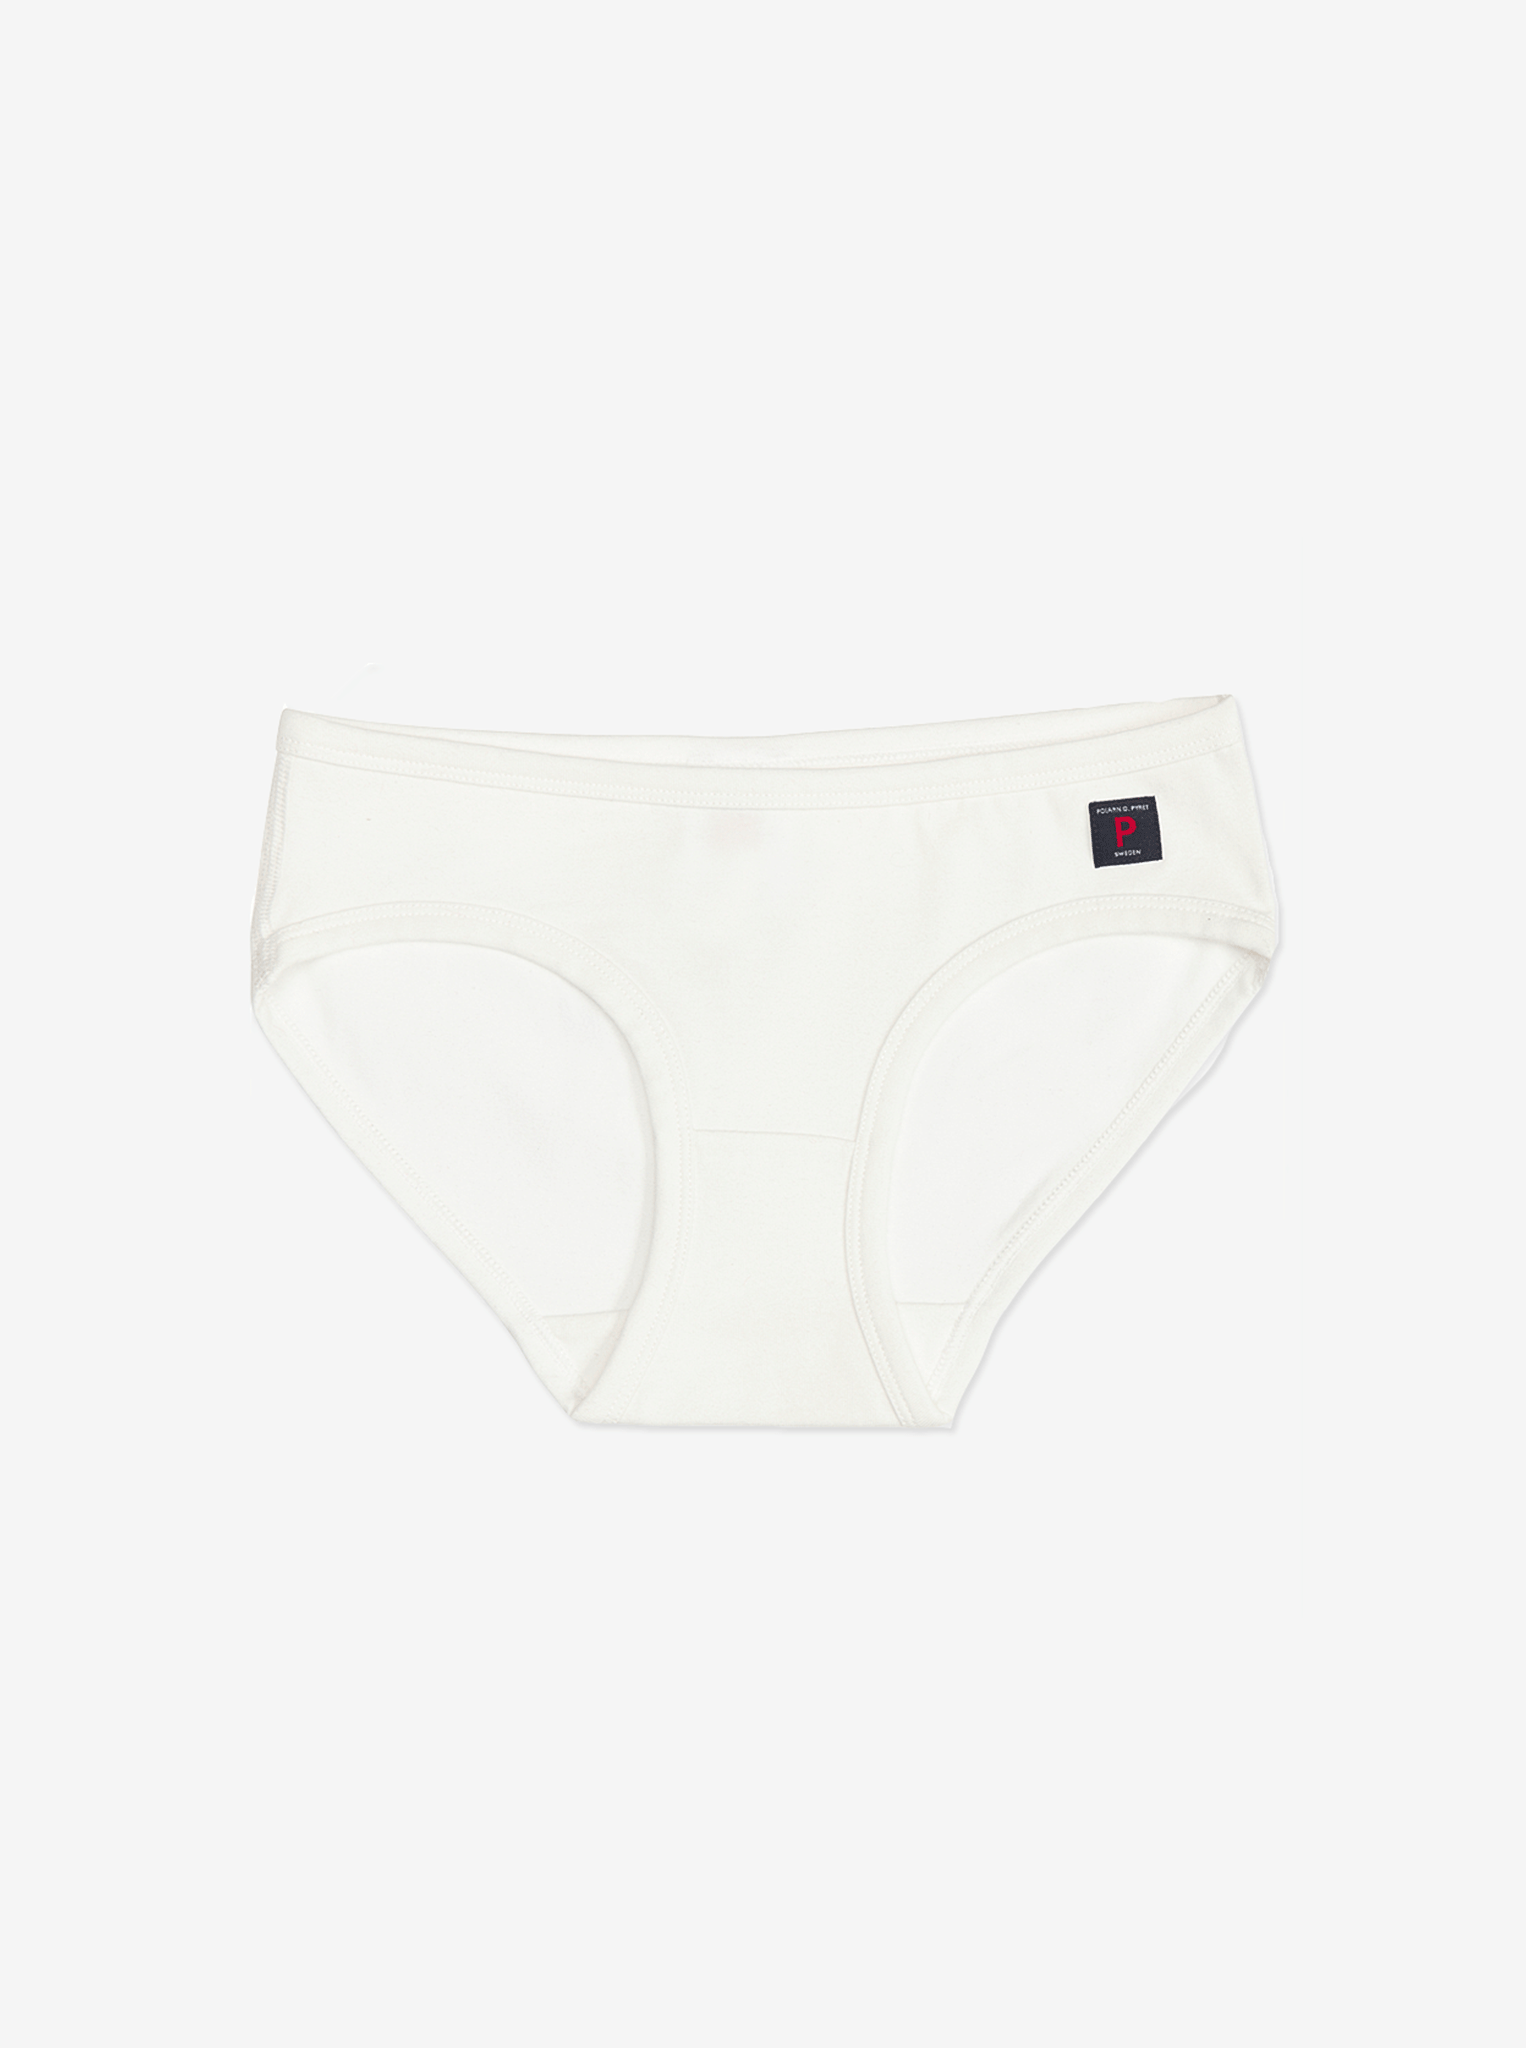 PO.P classic white girls briefs made with organic cotton 